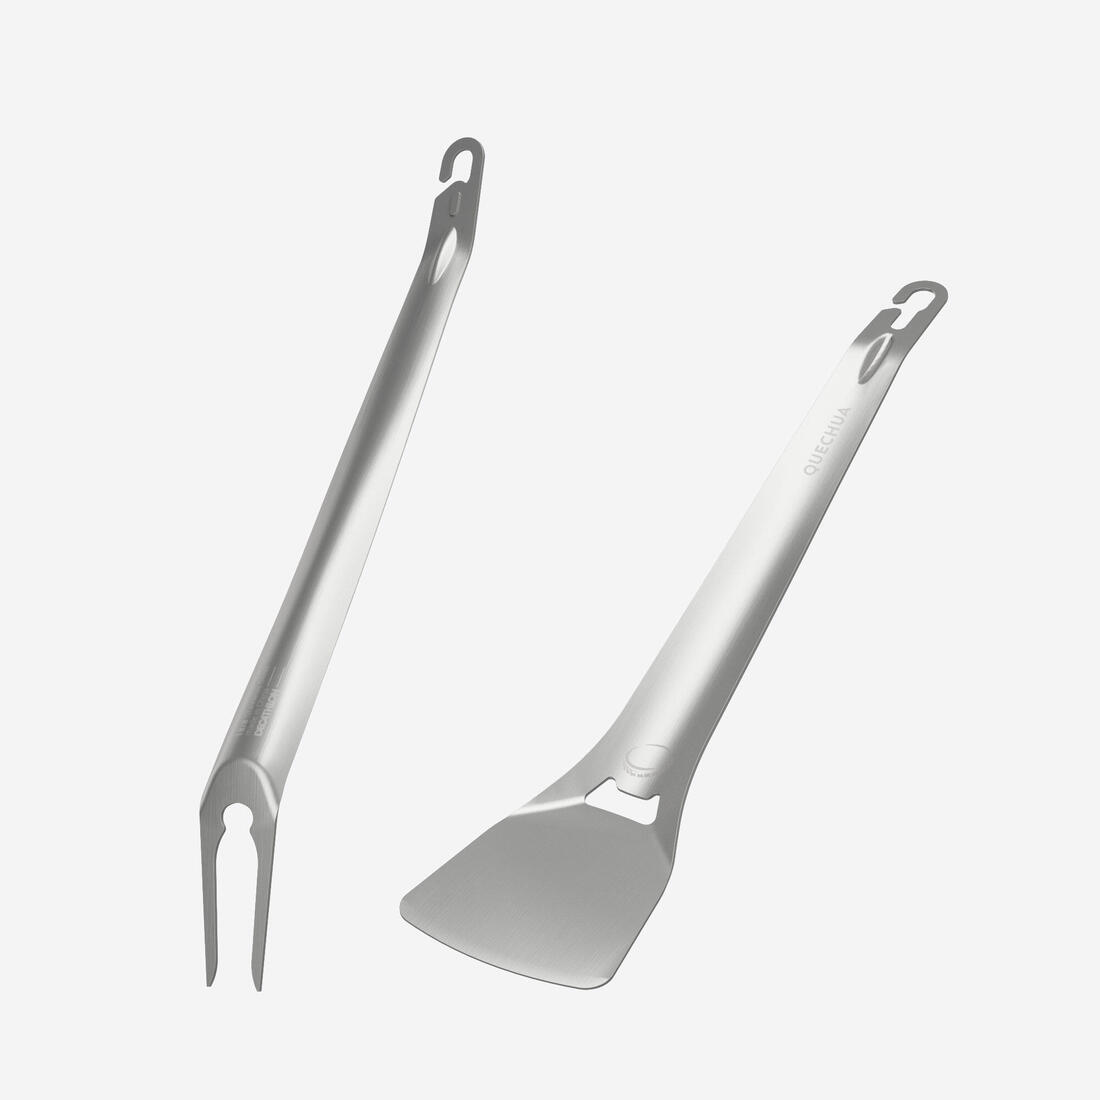 Set of 2 stainless-steel utensils, spatula and fork, for camping